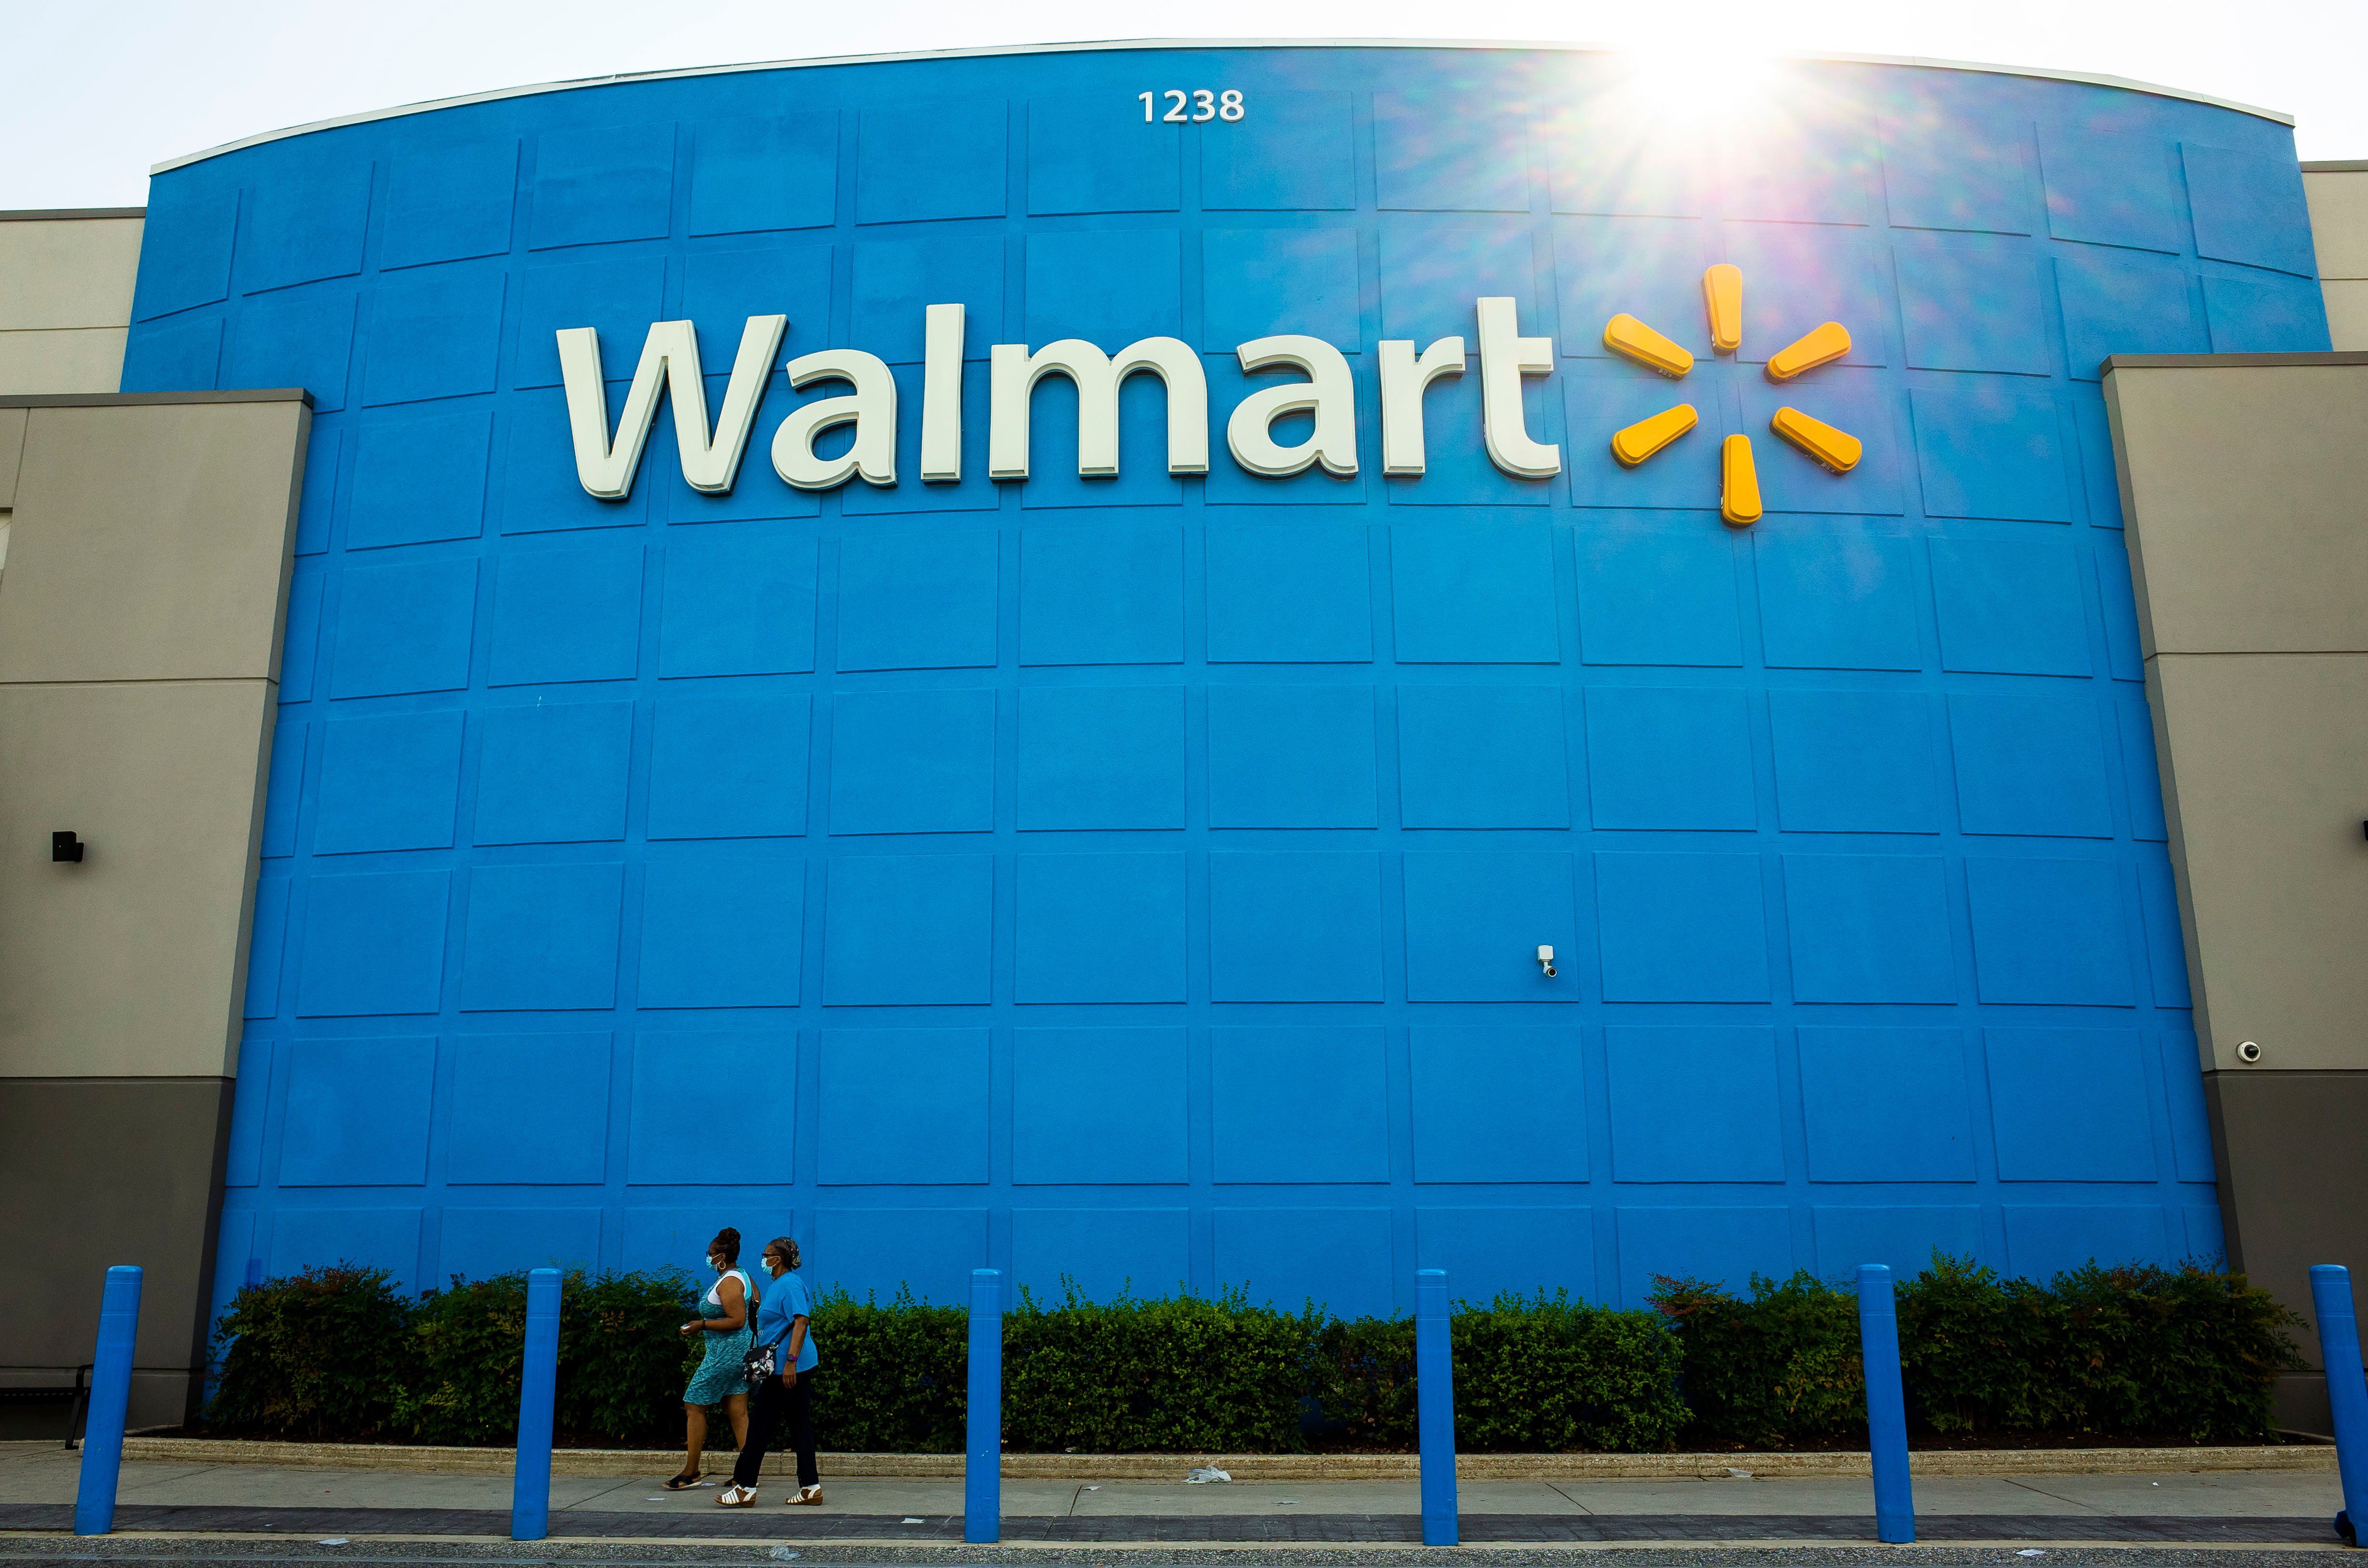 MRP Capital Group Acquires Walmart-Anchored Portfolio for $117M